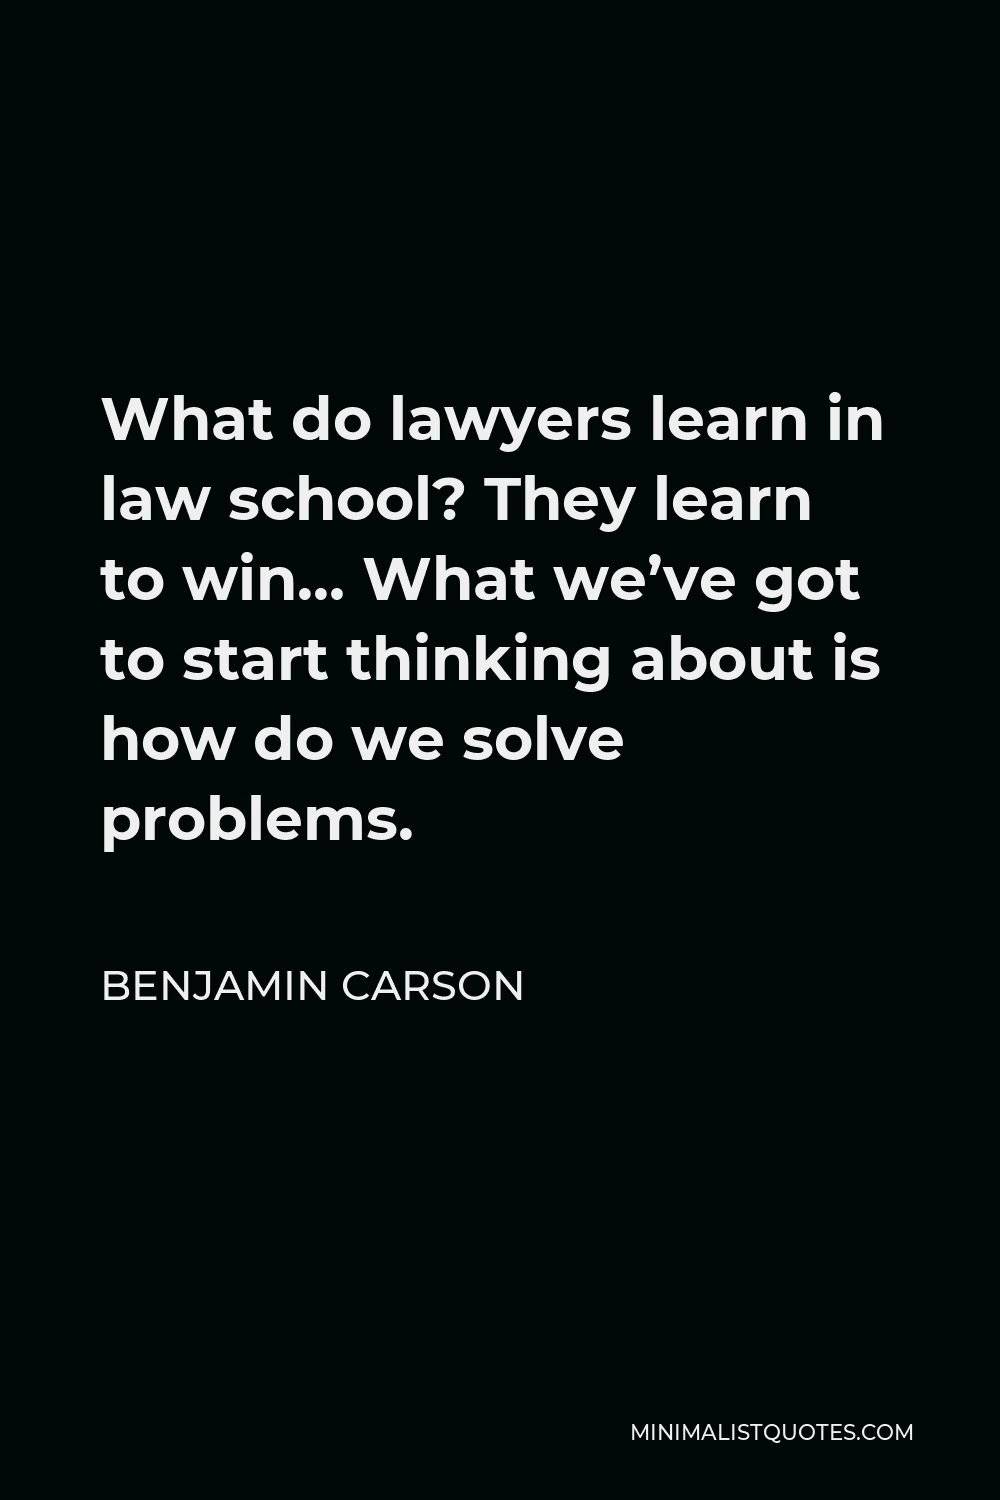 Benjamin Carson Quote - What do lawyers learn in law school? They learn to win… What we’ve got to start thinking about is how do we solve problems.